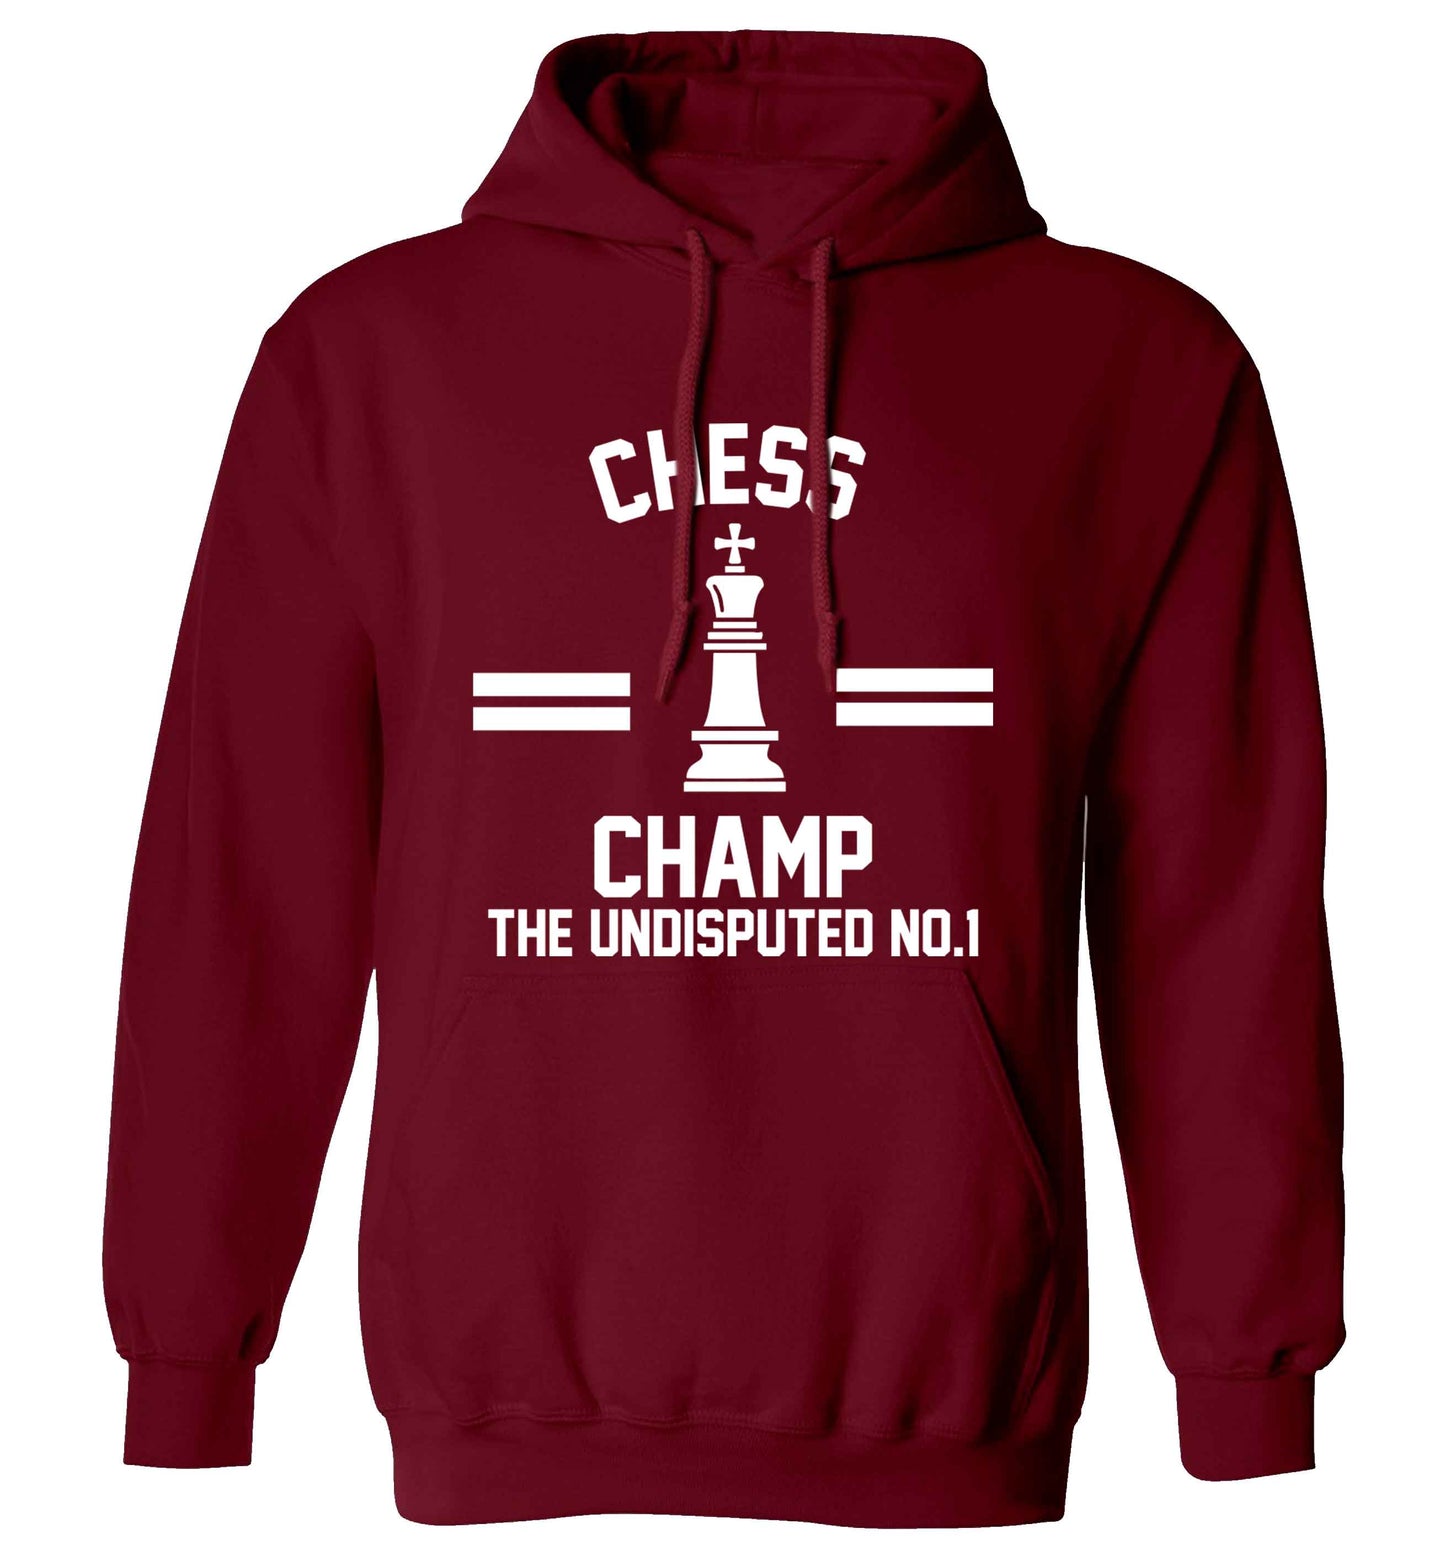 Undisputed chess championship no.1  adults unisex maroon hoodie 2XL